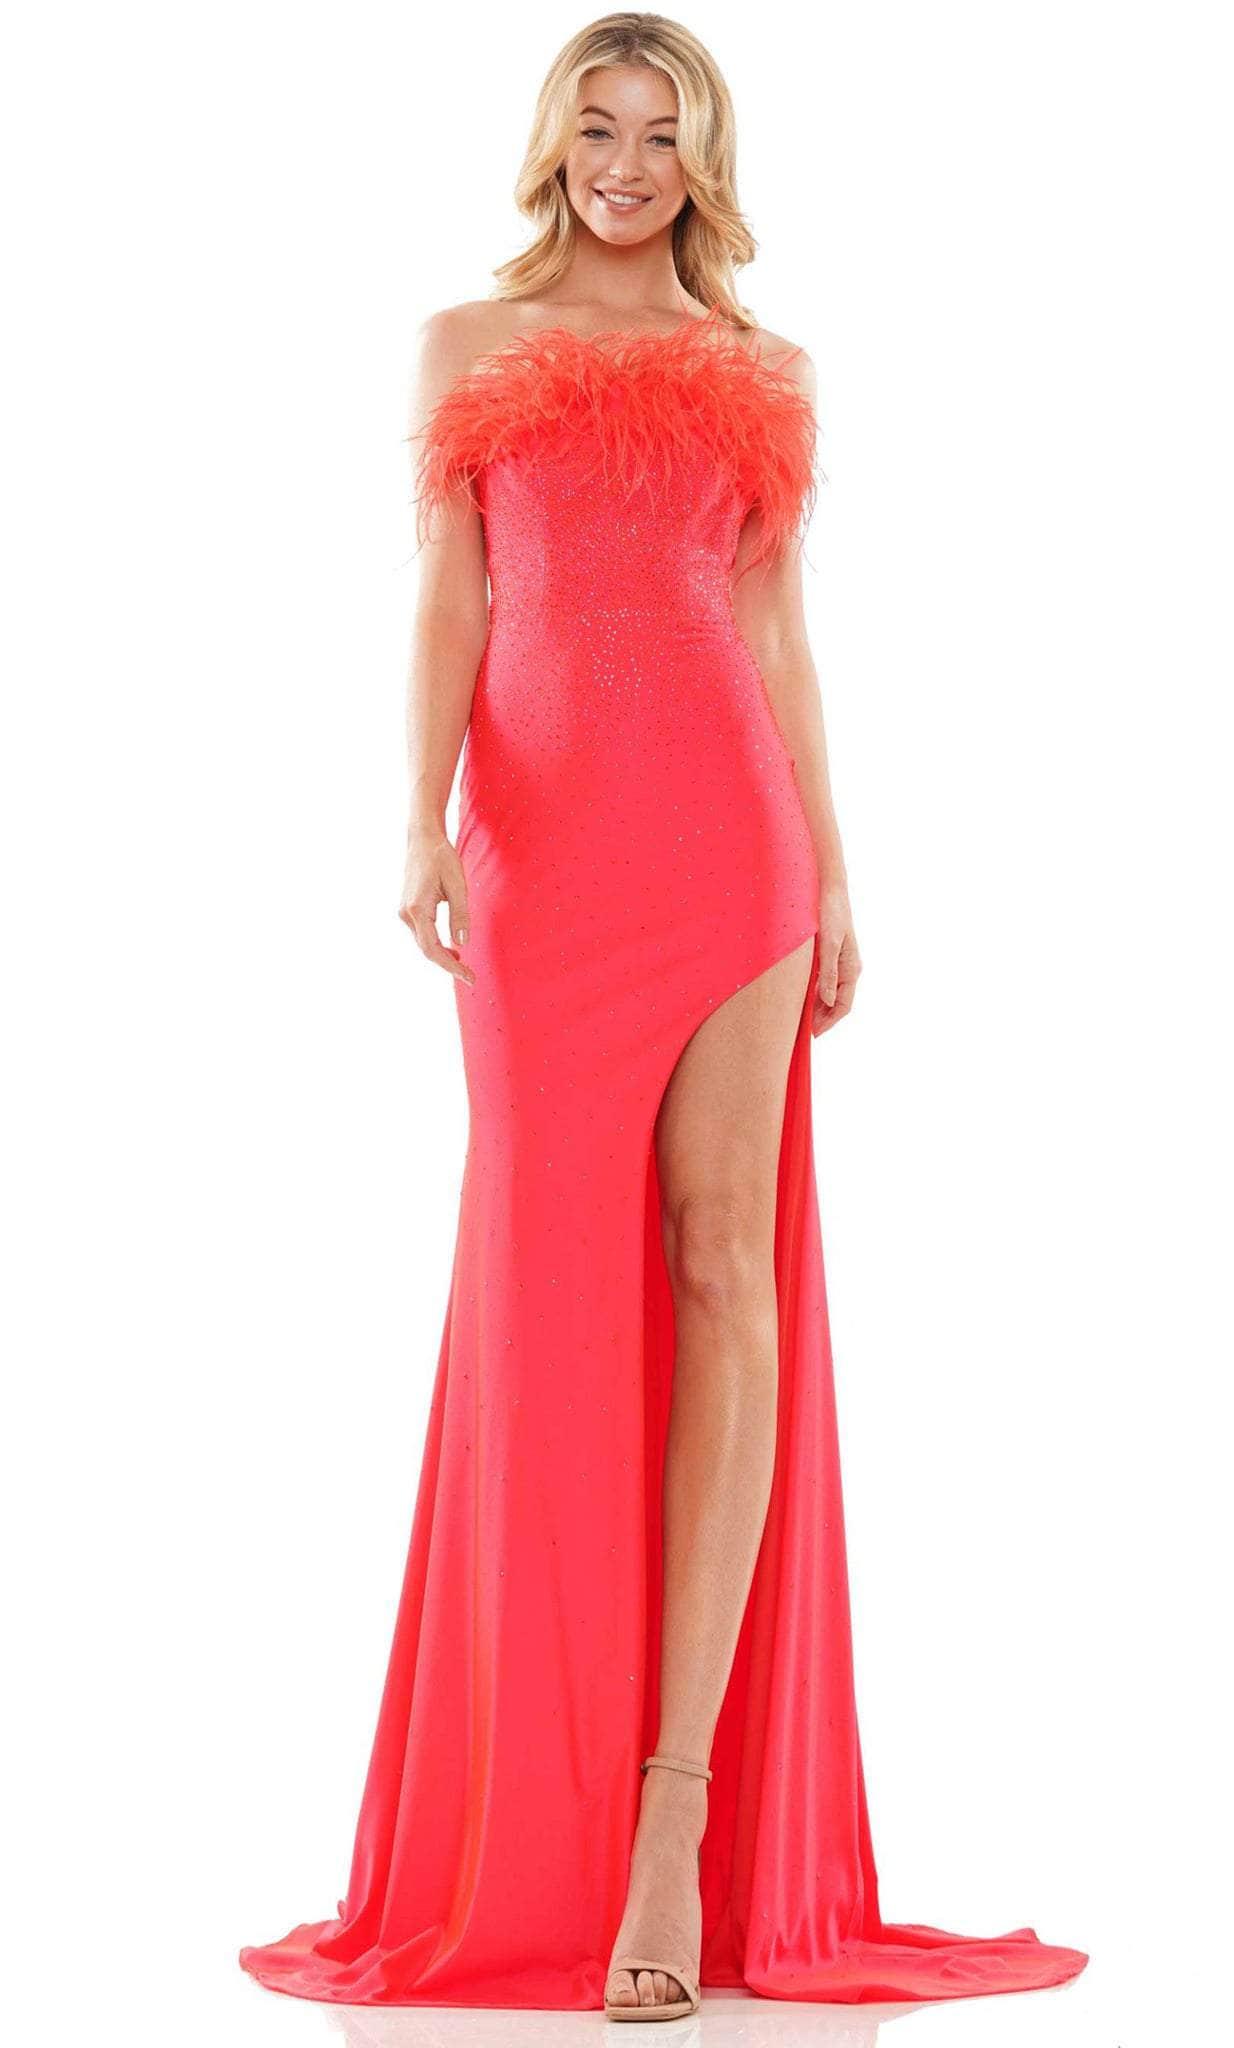 Colors Dress 2874 - Feathered Strapless Prom Dress Special Occasion Dress